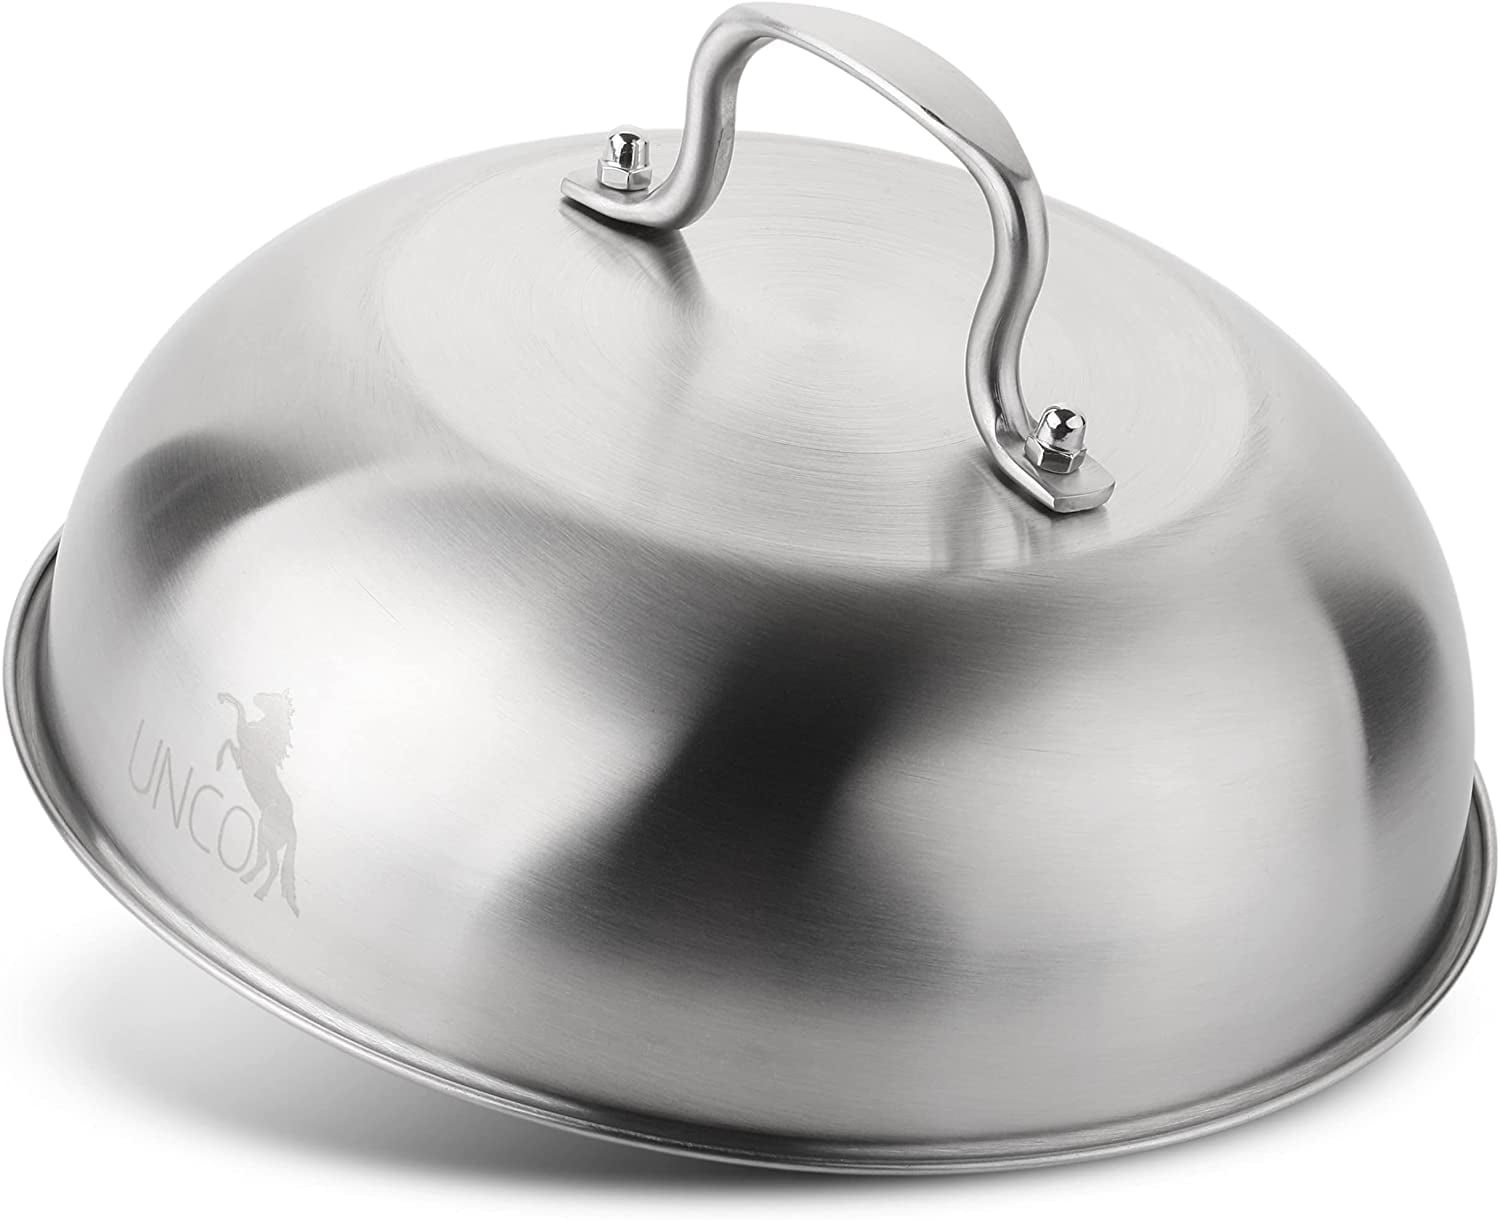 Griddle Accessories Stainless Steel Serving Dish Steaming Cover Cheese Melting Dome with Heat Resistant Knob-Handle and Plate BARGAIN4ALL Melting Dome and Burger Cover